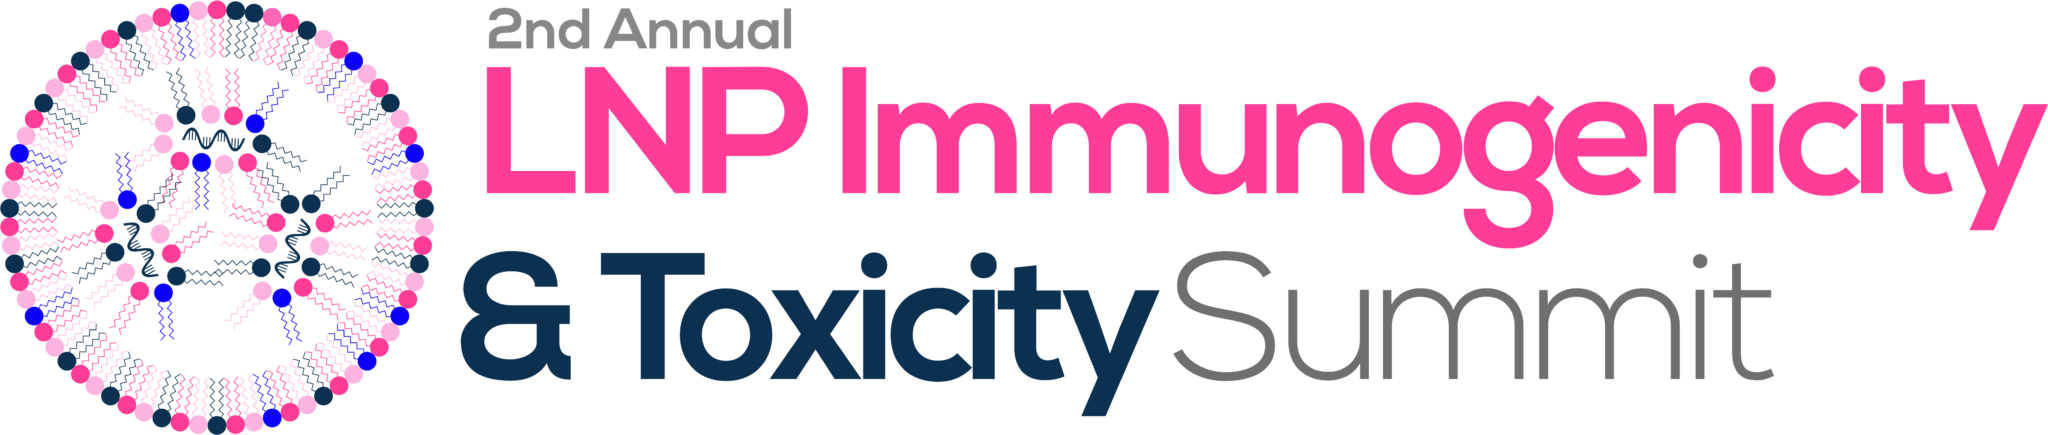 HW230519-2nd-Annual-LNP-Immunogenicity-and-Toxicity-logo-2048x435